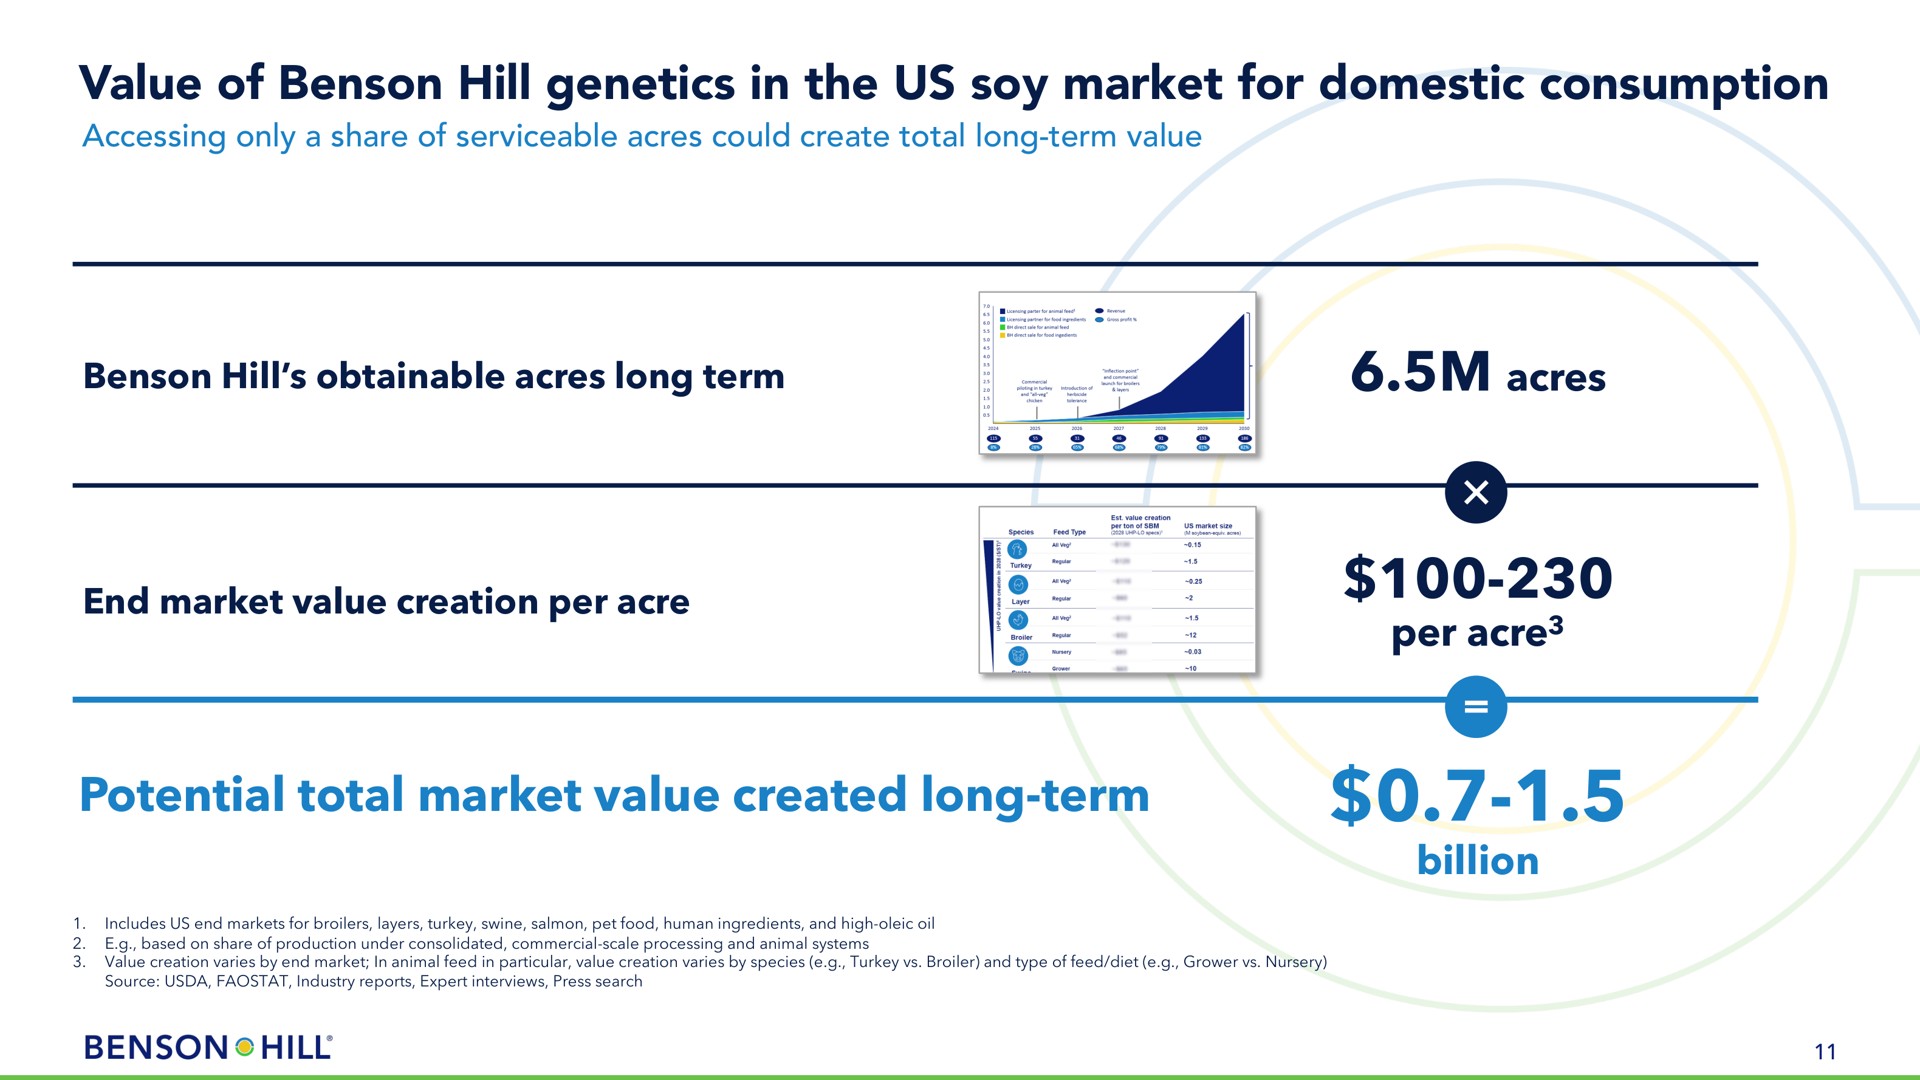 value of hill genetics in the us soy market for domestic consumption accessing only a share of serviceable acres could create total long term value hill obtainable acres long term acres end market value creation per acre potential total market value created long term per acre billion | Benson Hill